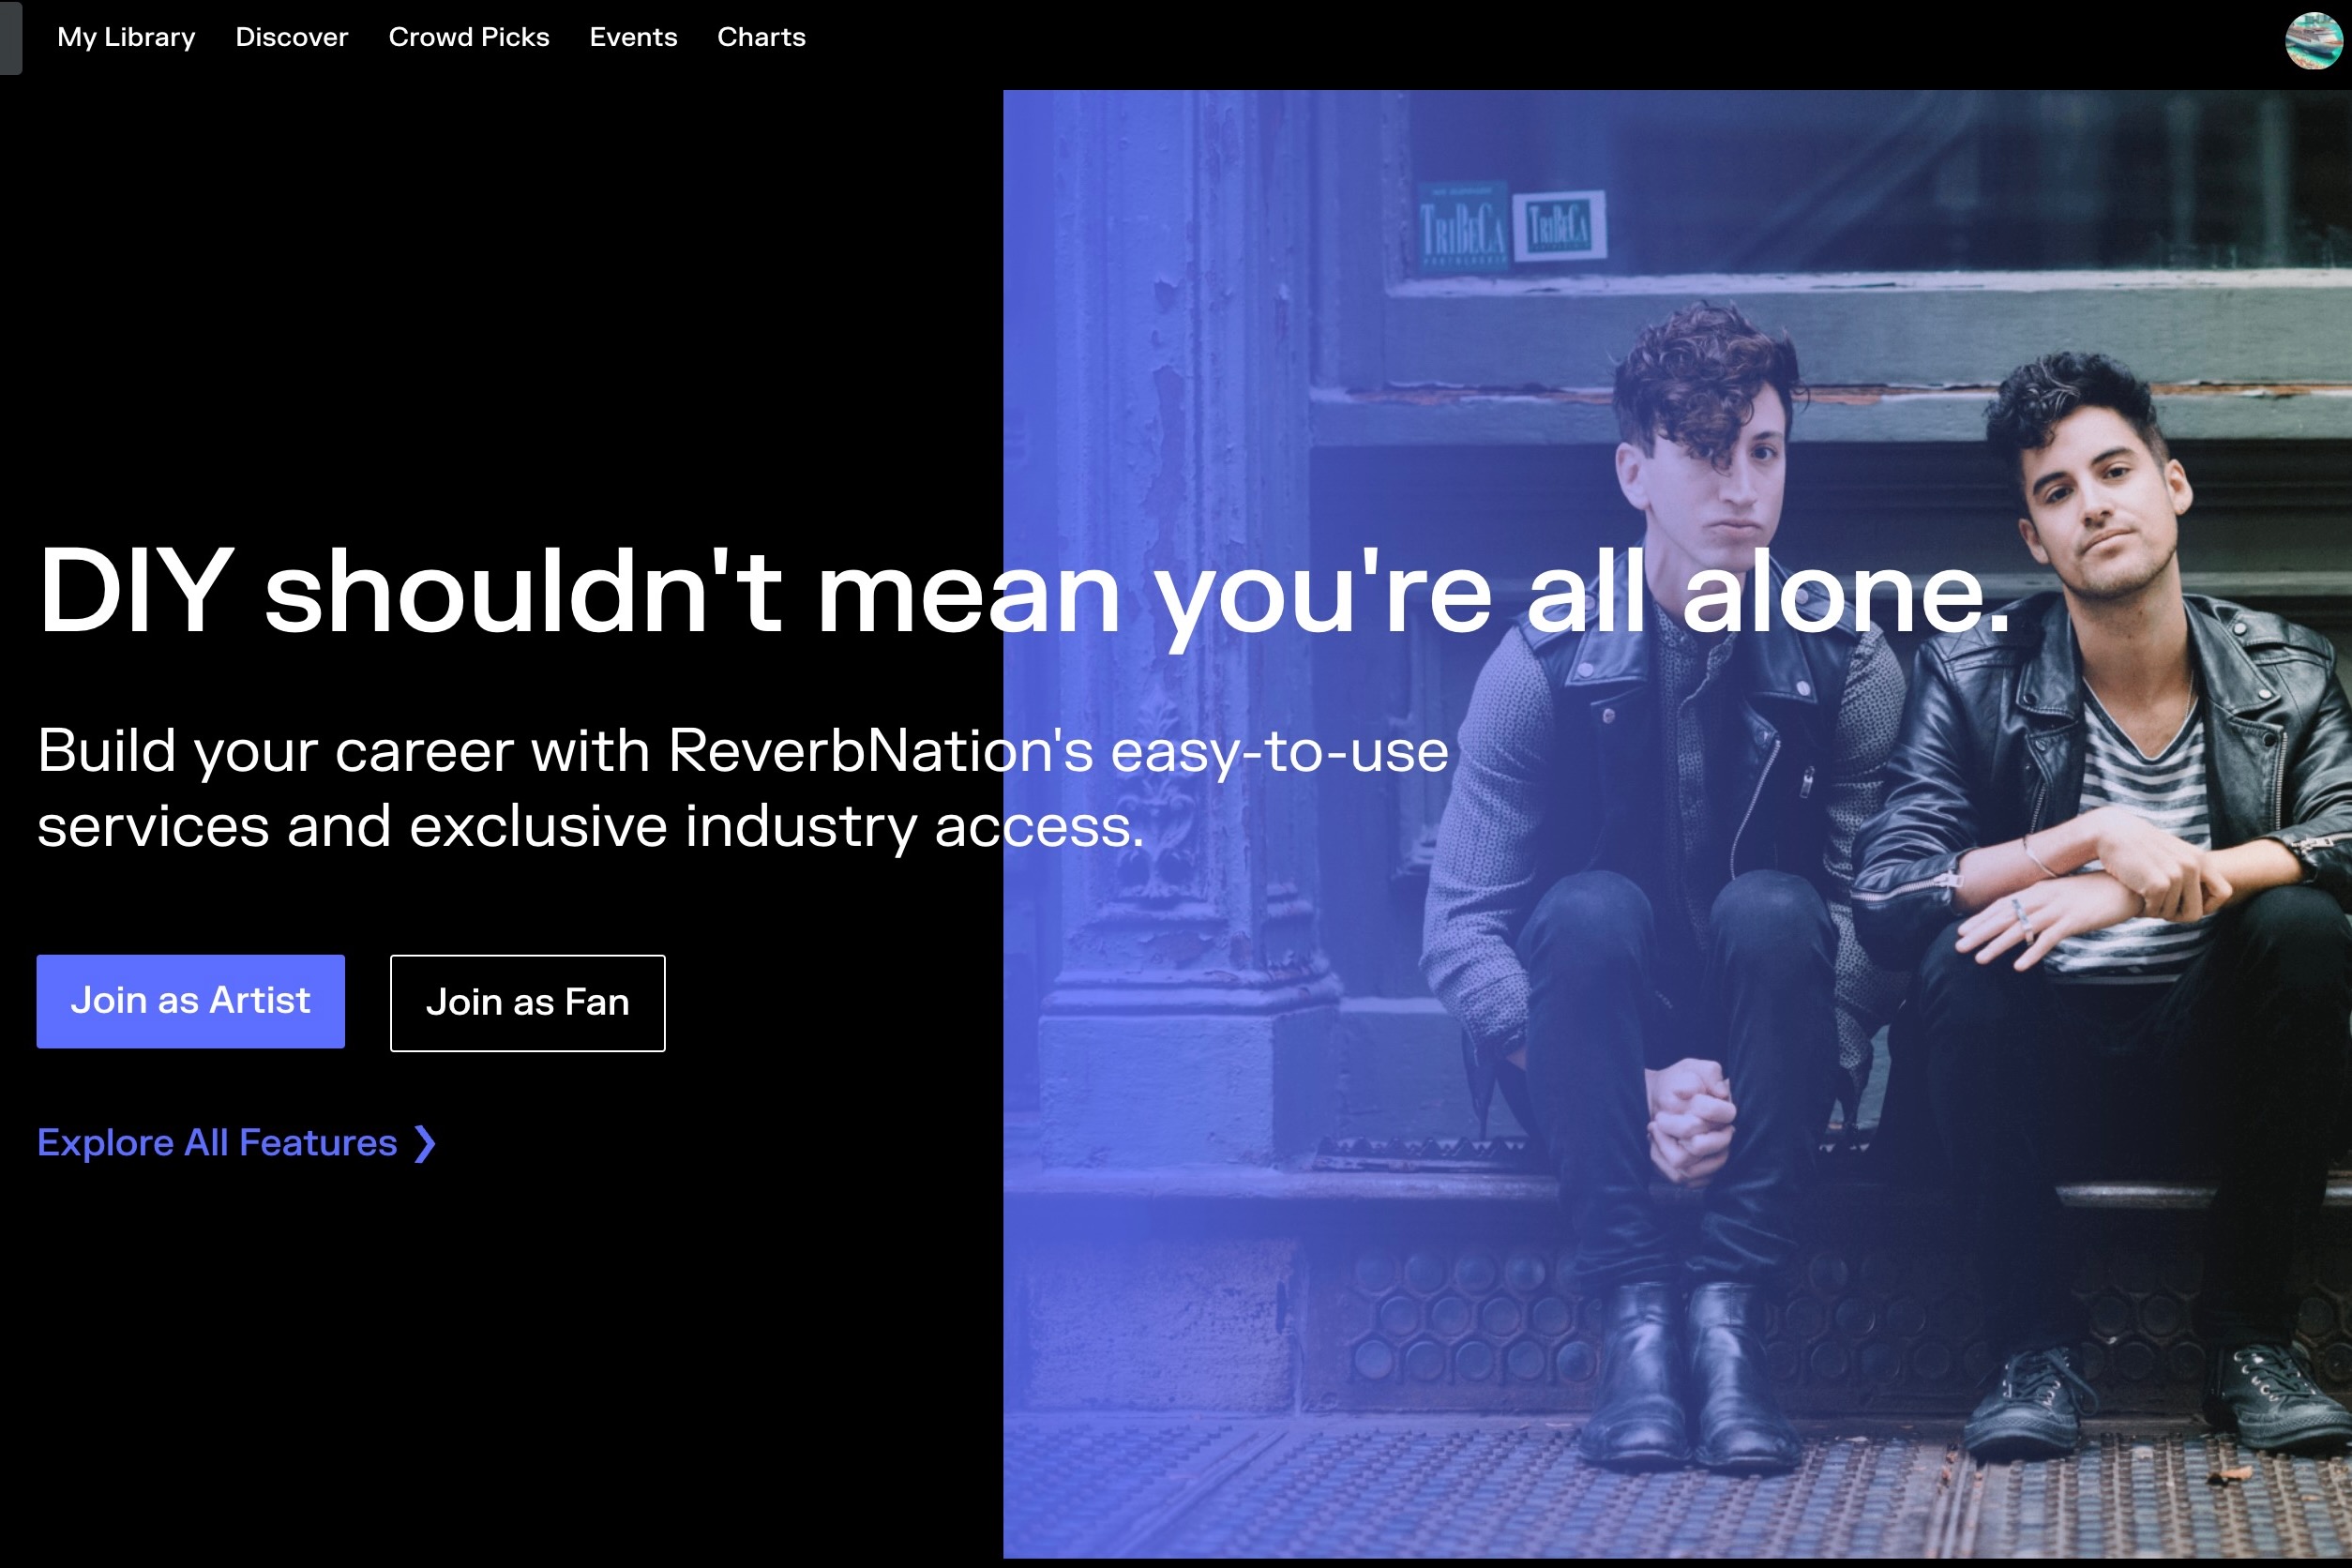 Home page of ReverbNation website.